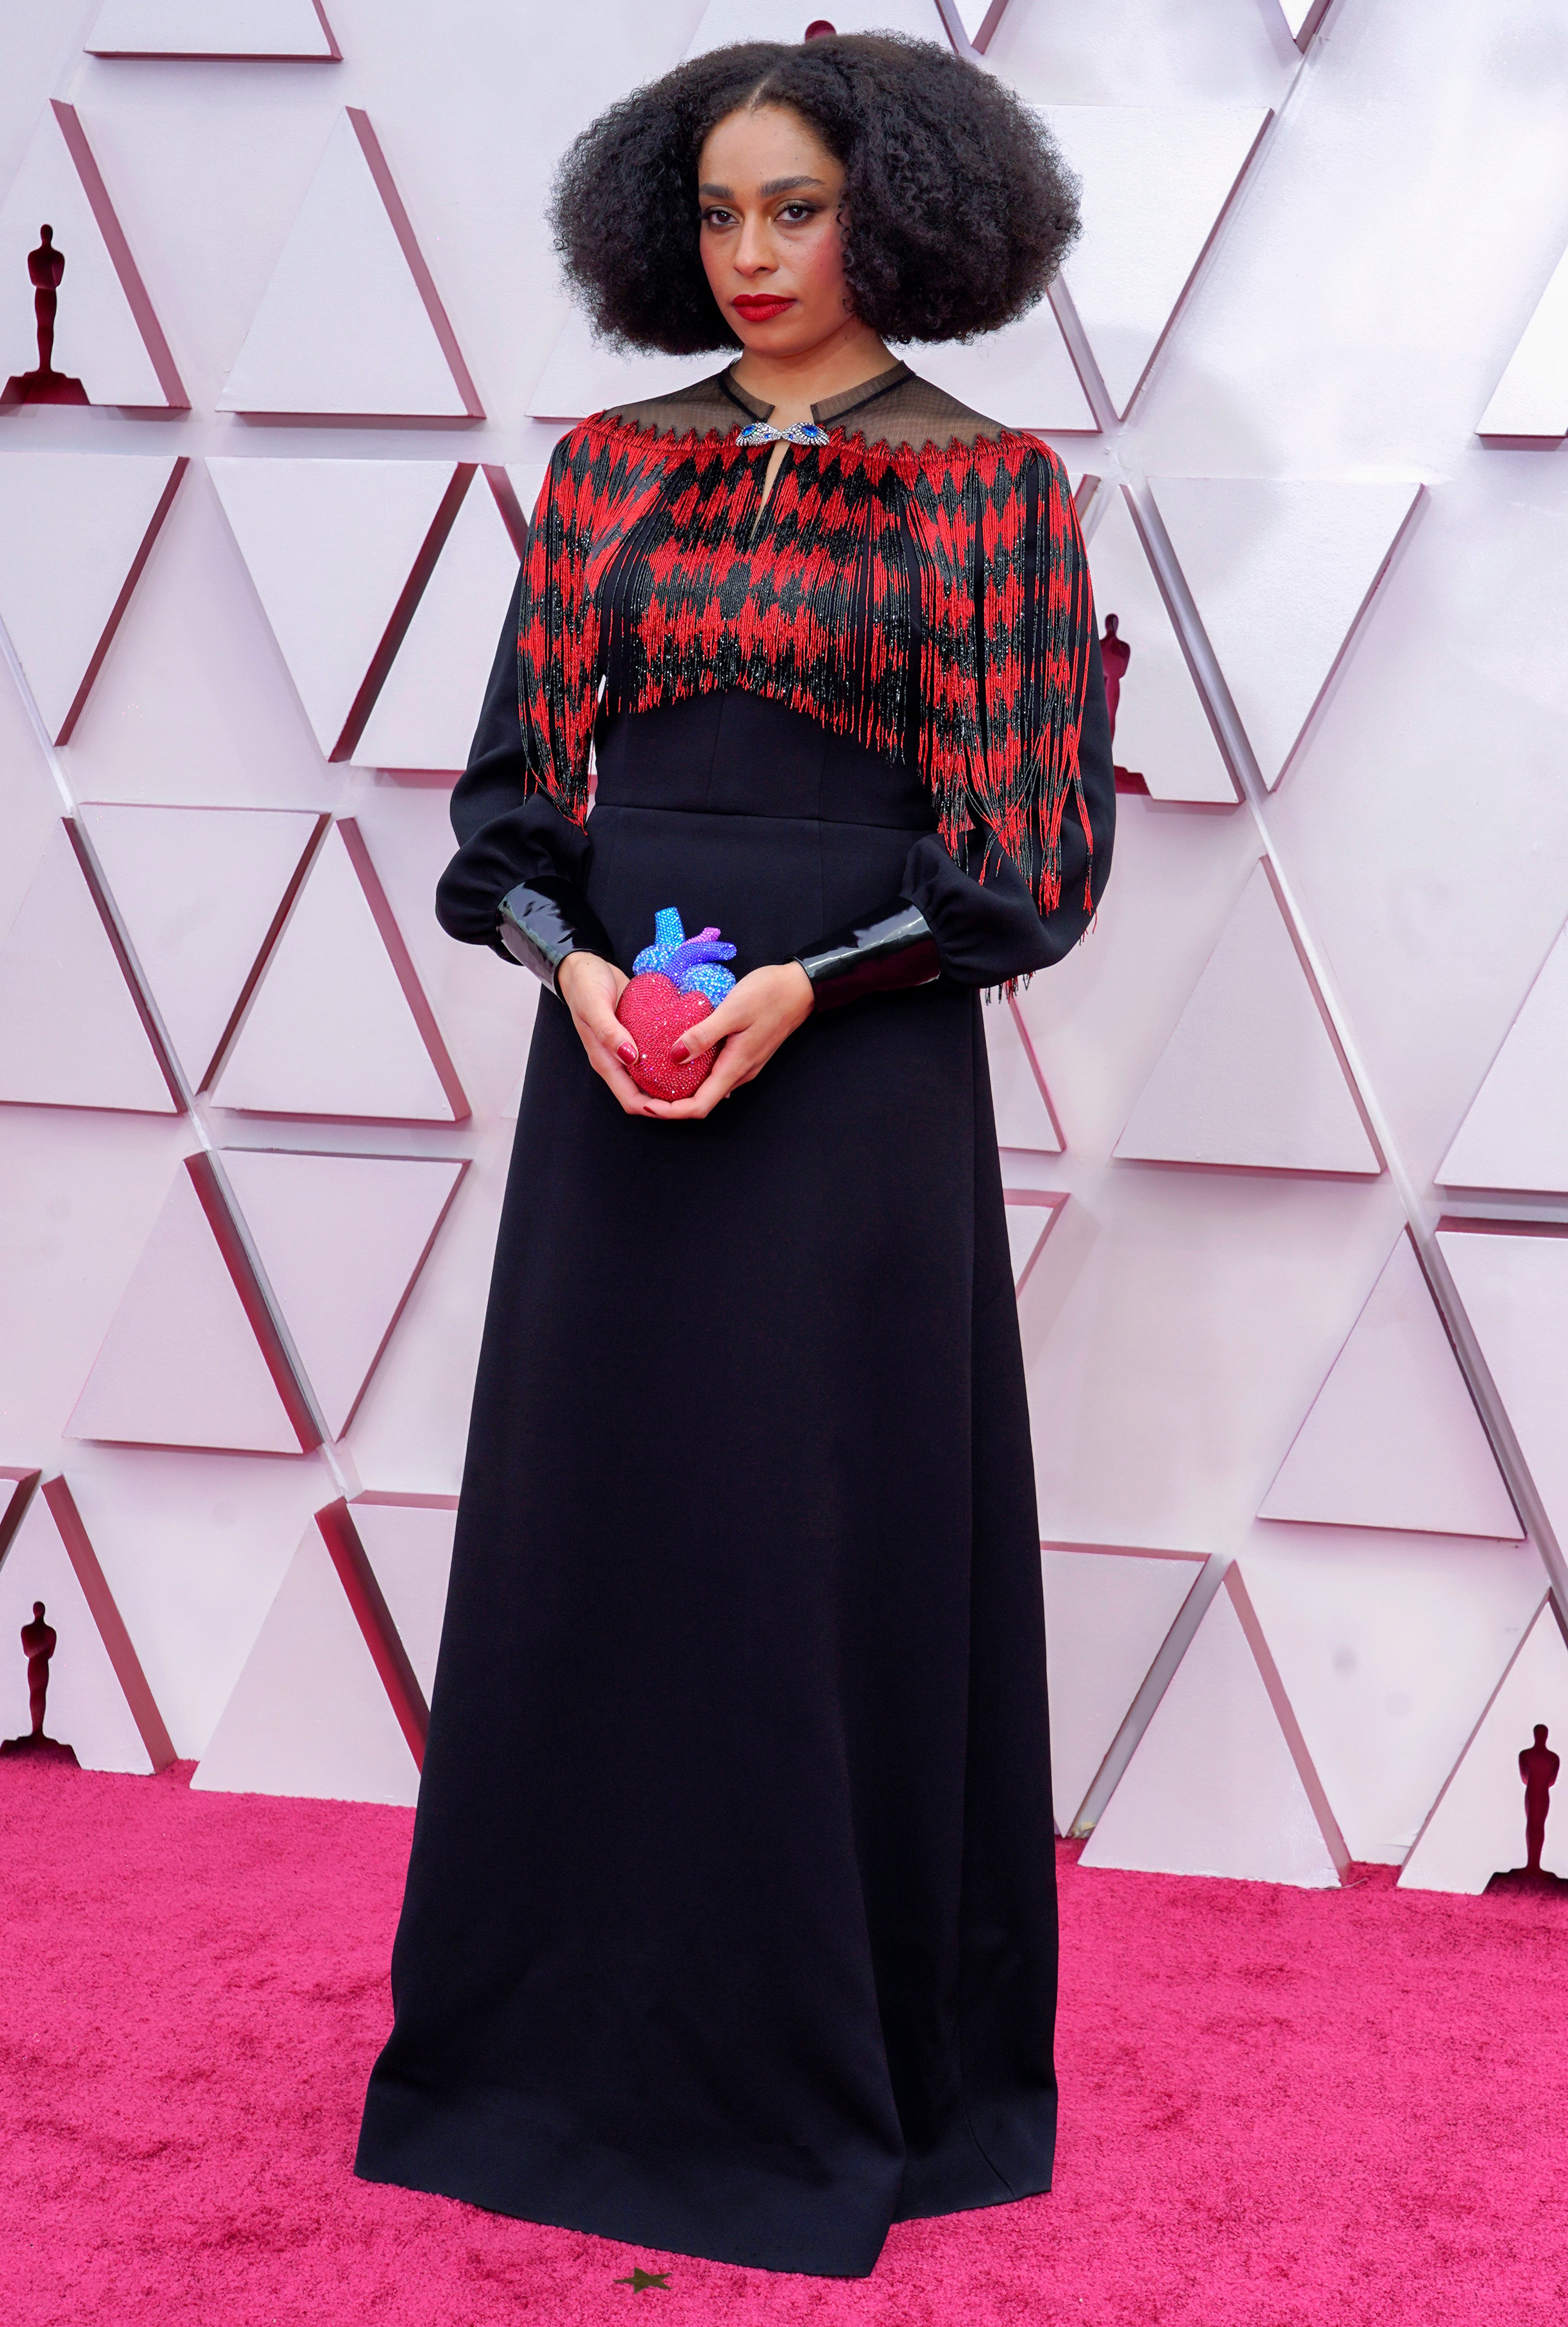 Celeste Waite attends the 2021 Oscars in Gucci